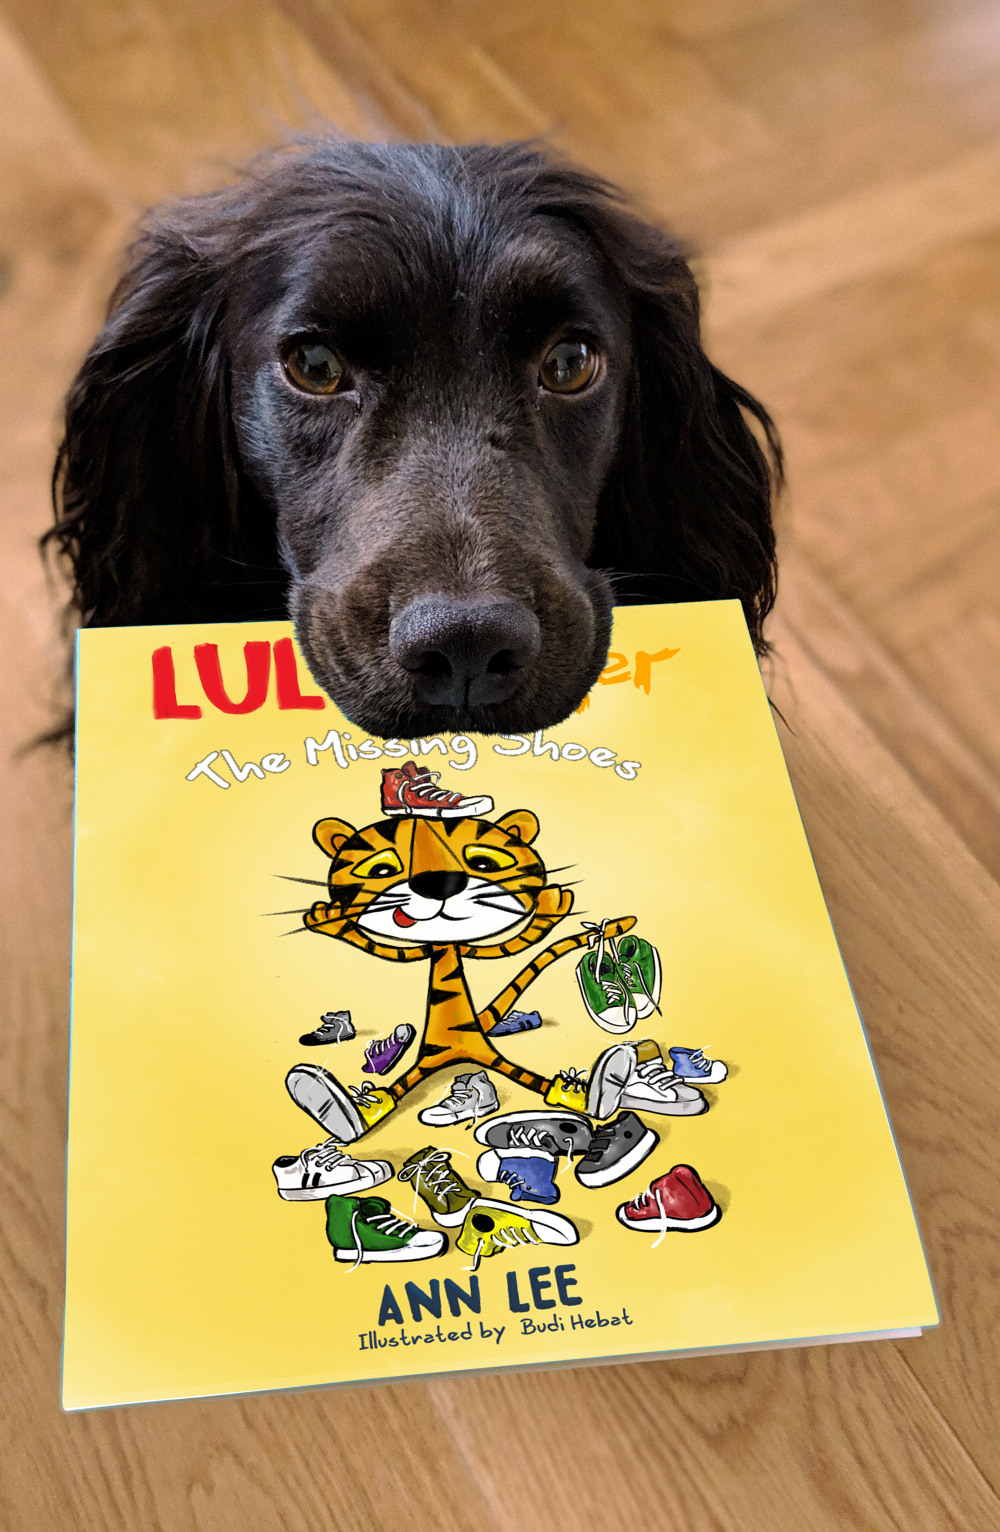 FREE: LULU the Tiger & The Missing Shoes by Ann Lee